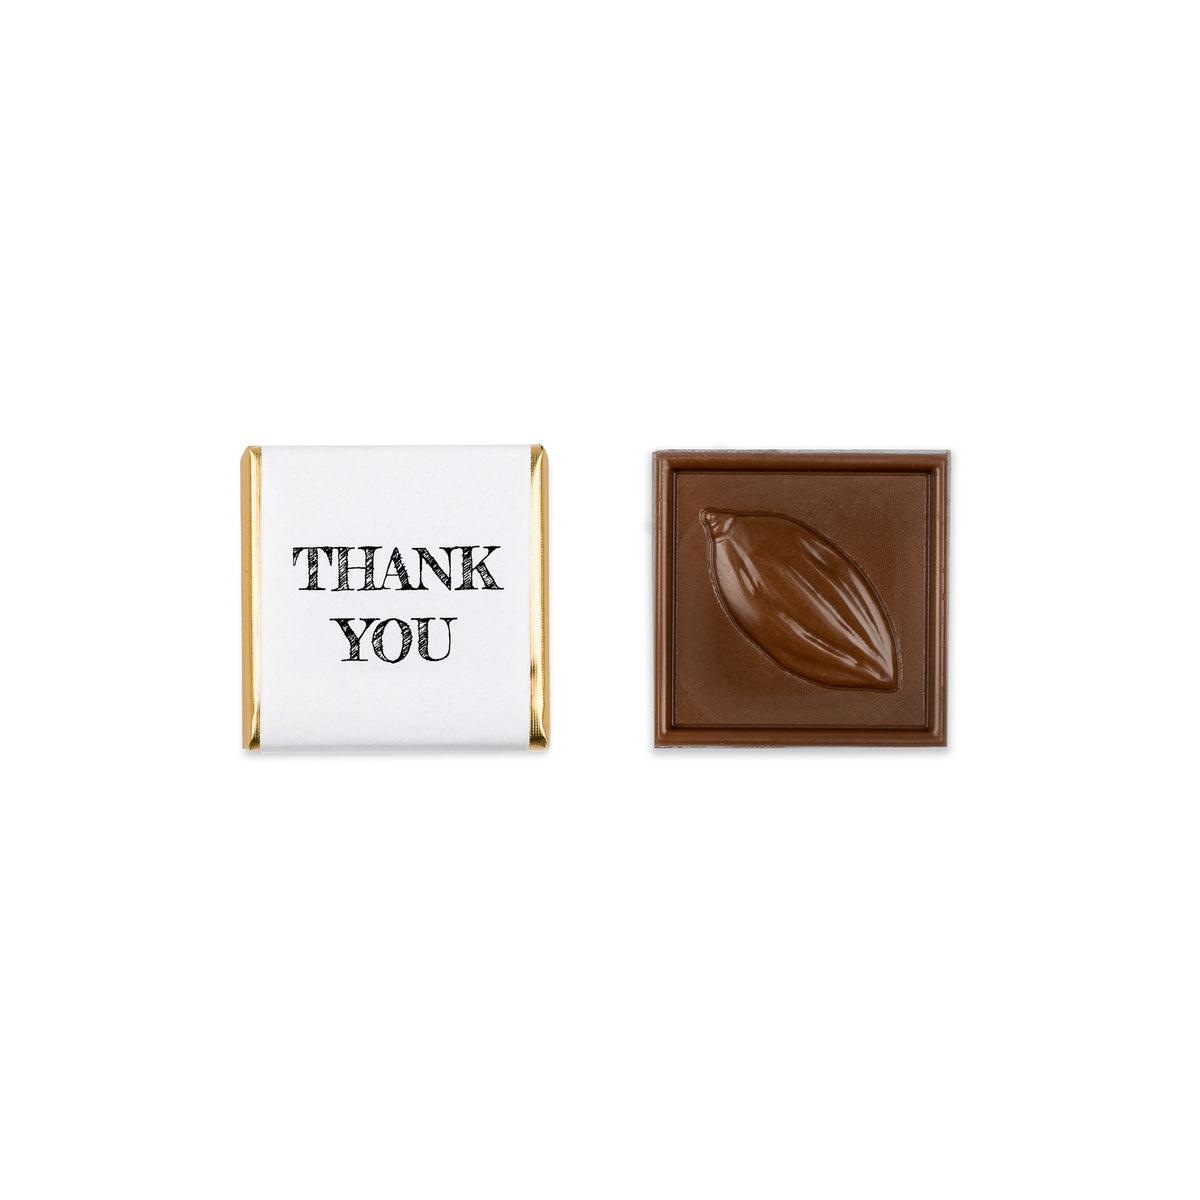 100 chocolate &quot;Thank You&quot; squares - 0.50$ each